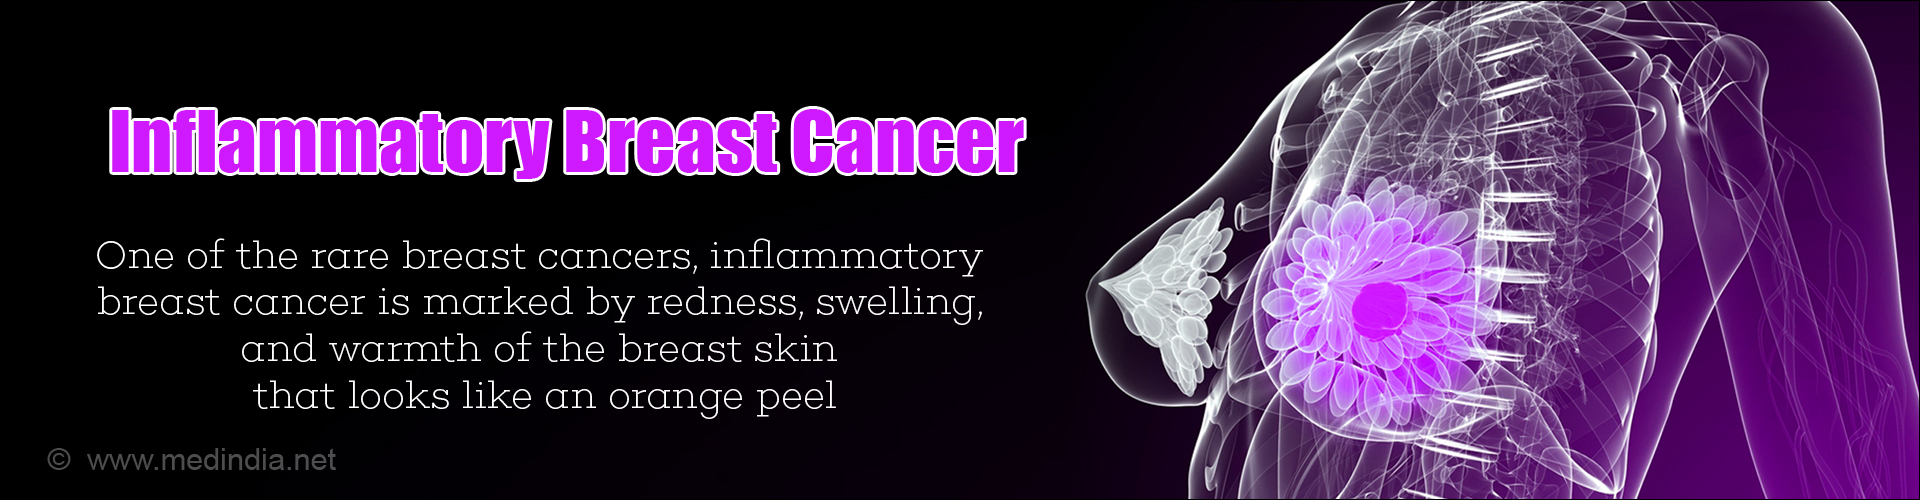 Inflammatory Breast Cancer
- One of the rare breast cancers, inflammatory breast cancer is marked by redness, swelling, and warmth of the breast skin that looks like an orange peel